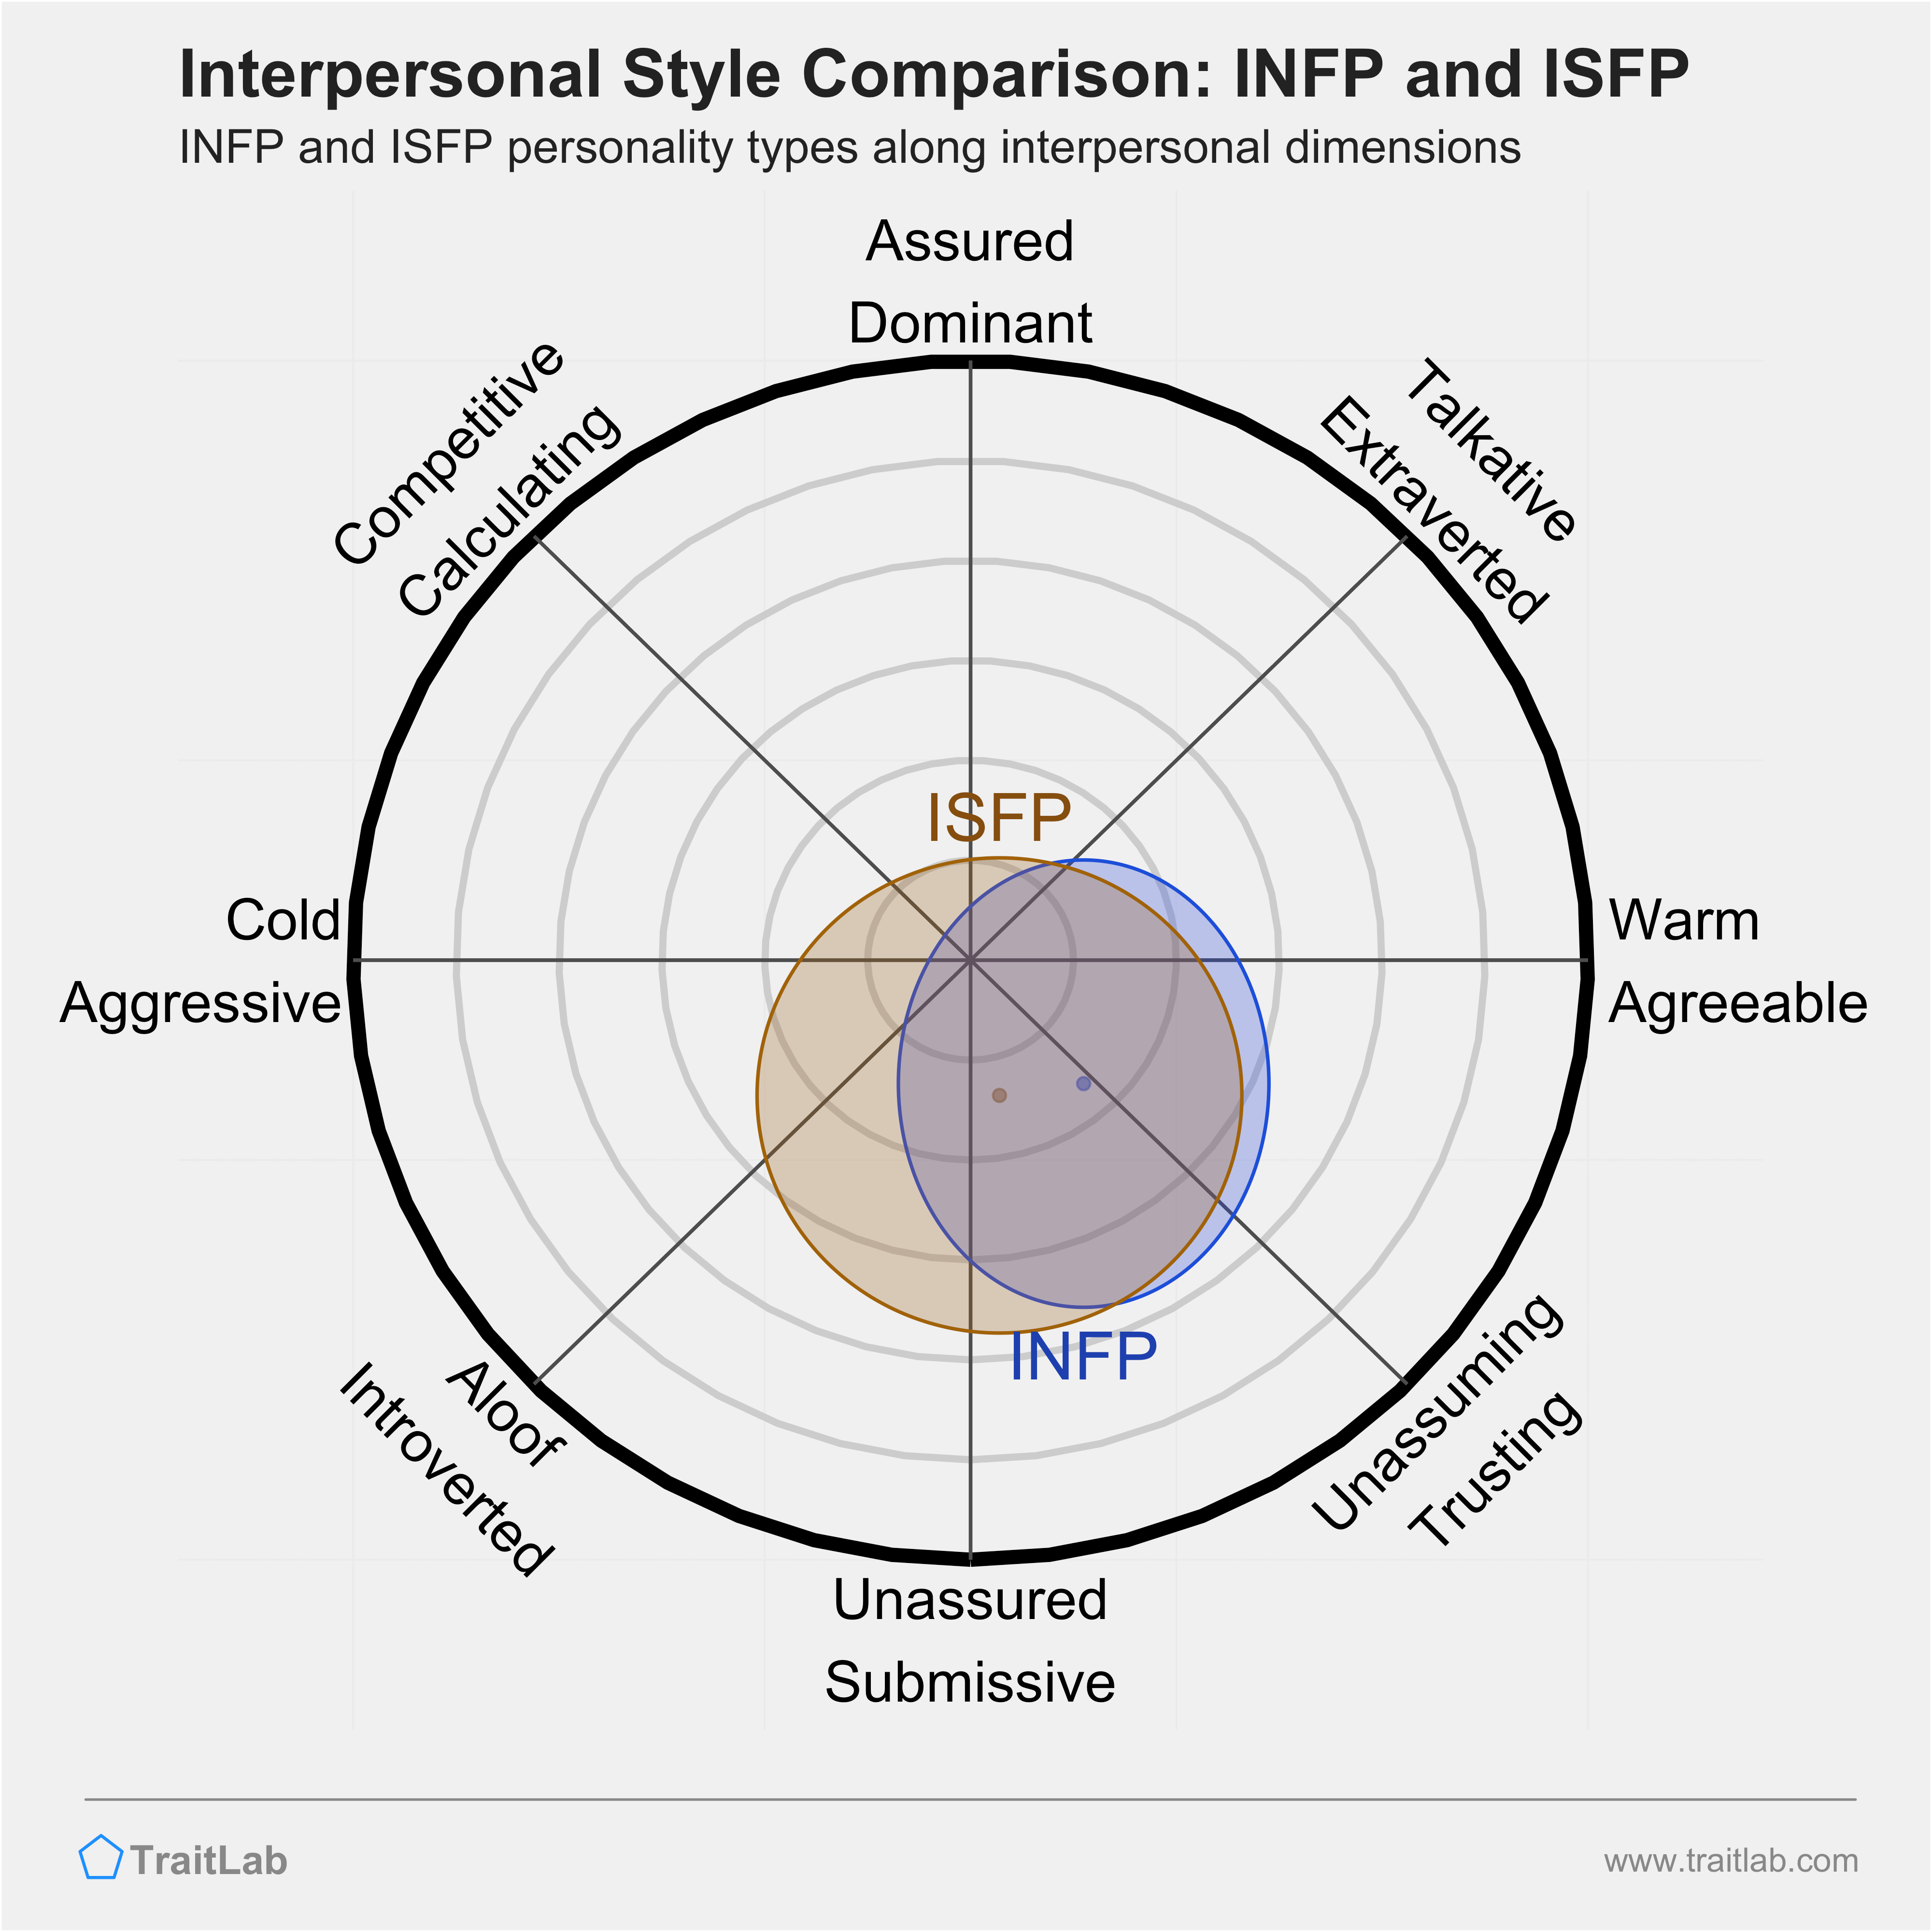 INFP and ISFP comparison across interpersonal dimensions